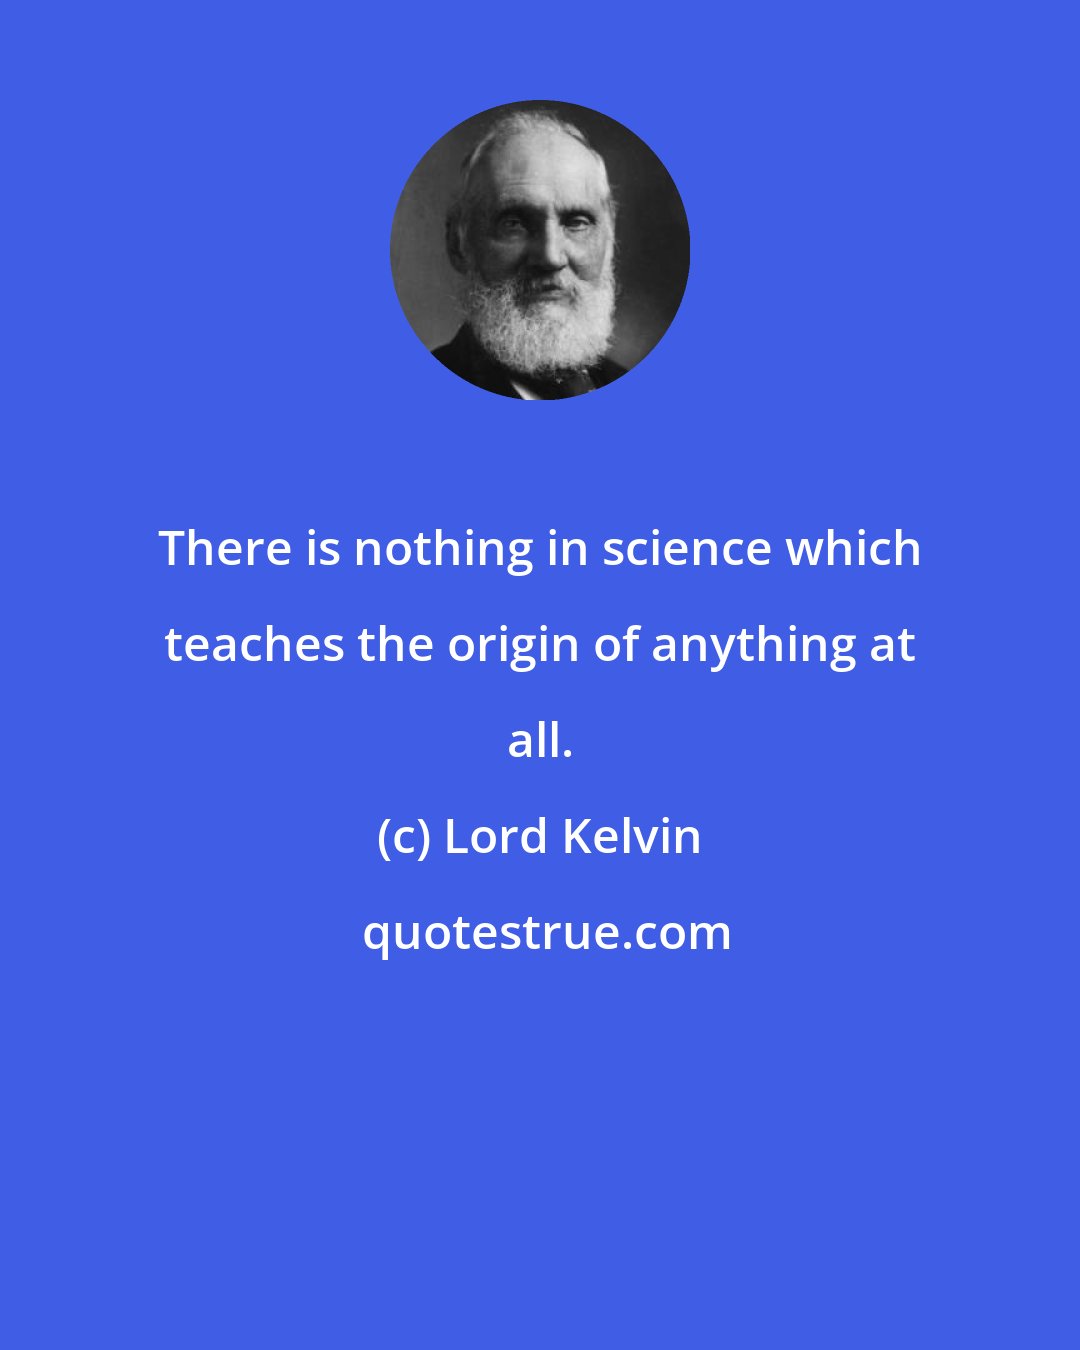 Lord Kelvin: There is nothing in science which teaches the origin of anything at all.